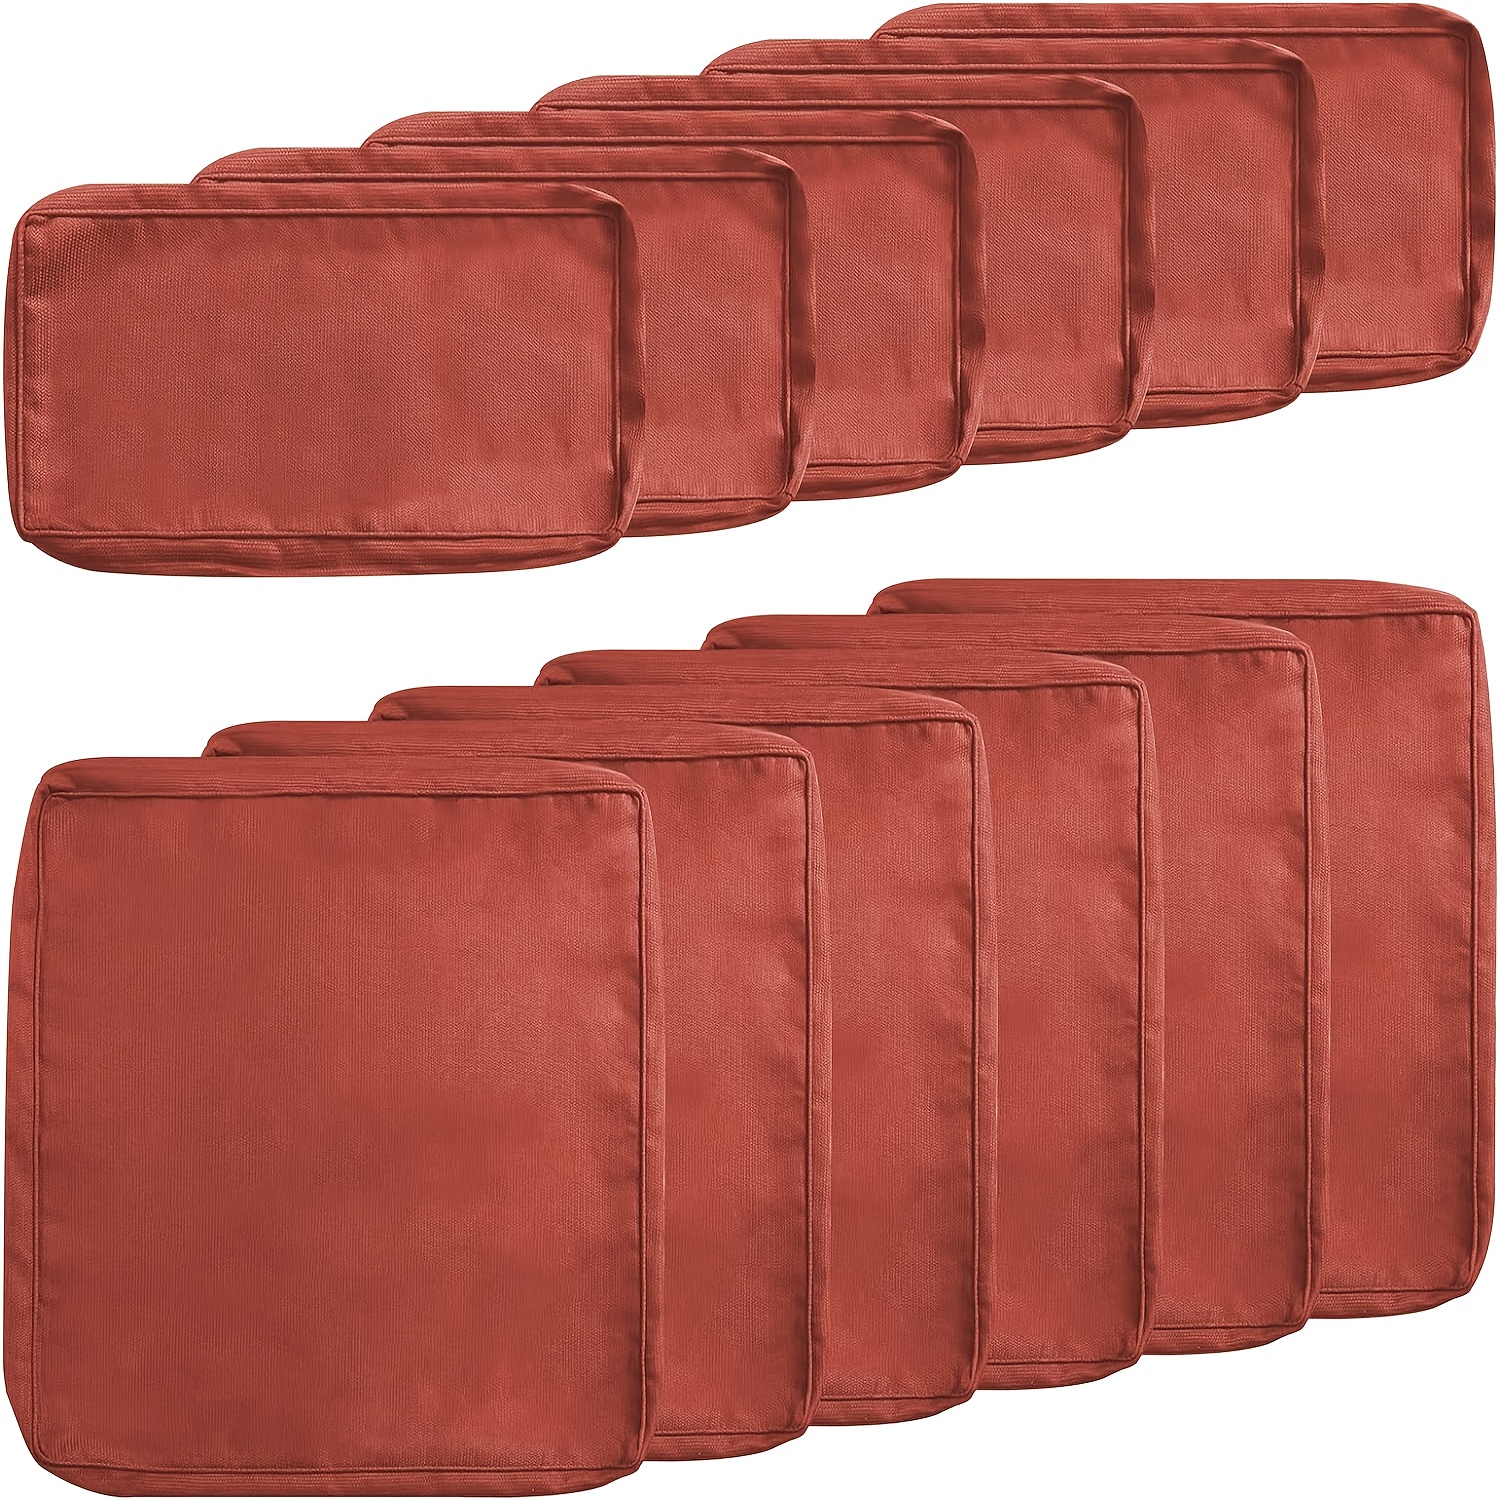 

12 Pieces Patio Seat Cushion Cover Replacement, Washable Outdoor Furniture Cushion Slipcovers (6 Seat Cushion Cover And 6 Backrest Pillow Covers) With Zipper For Patio Sofa, Orange